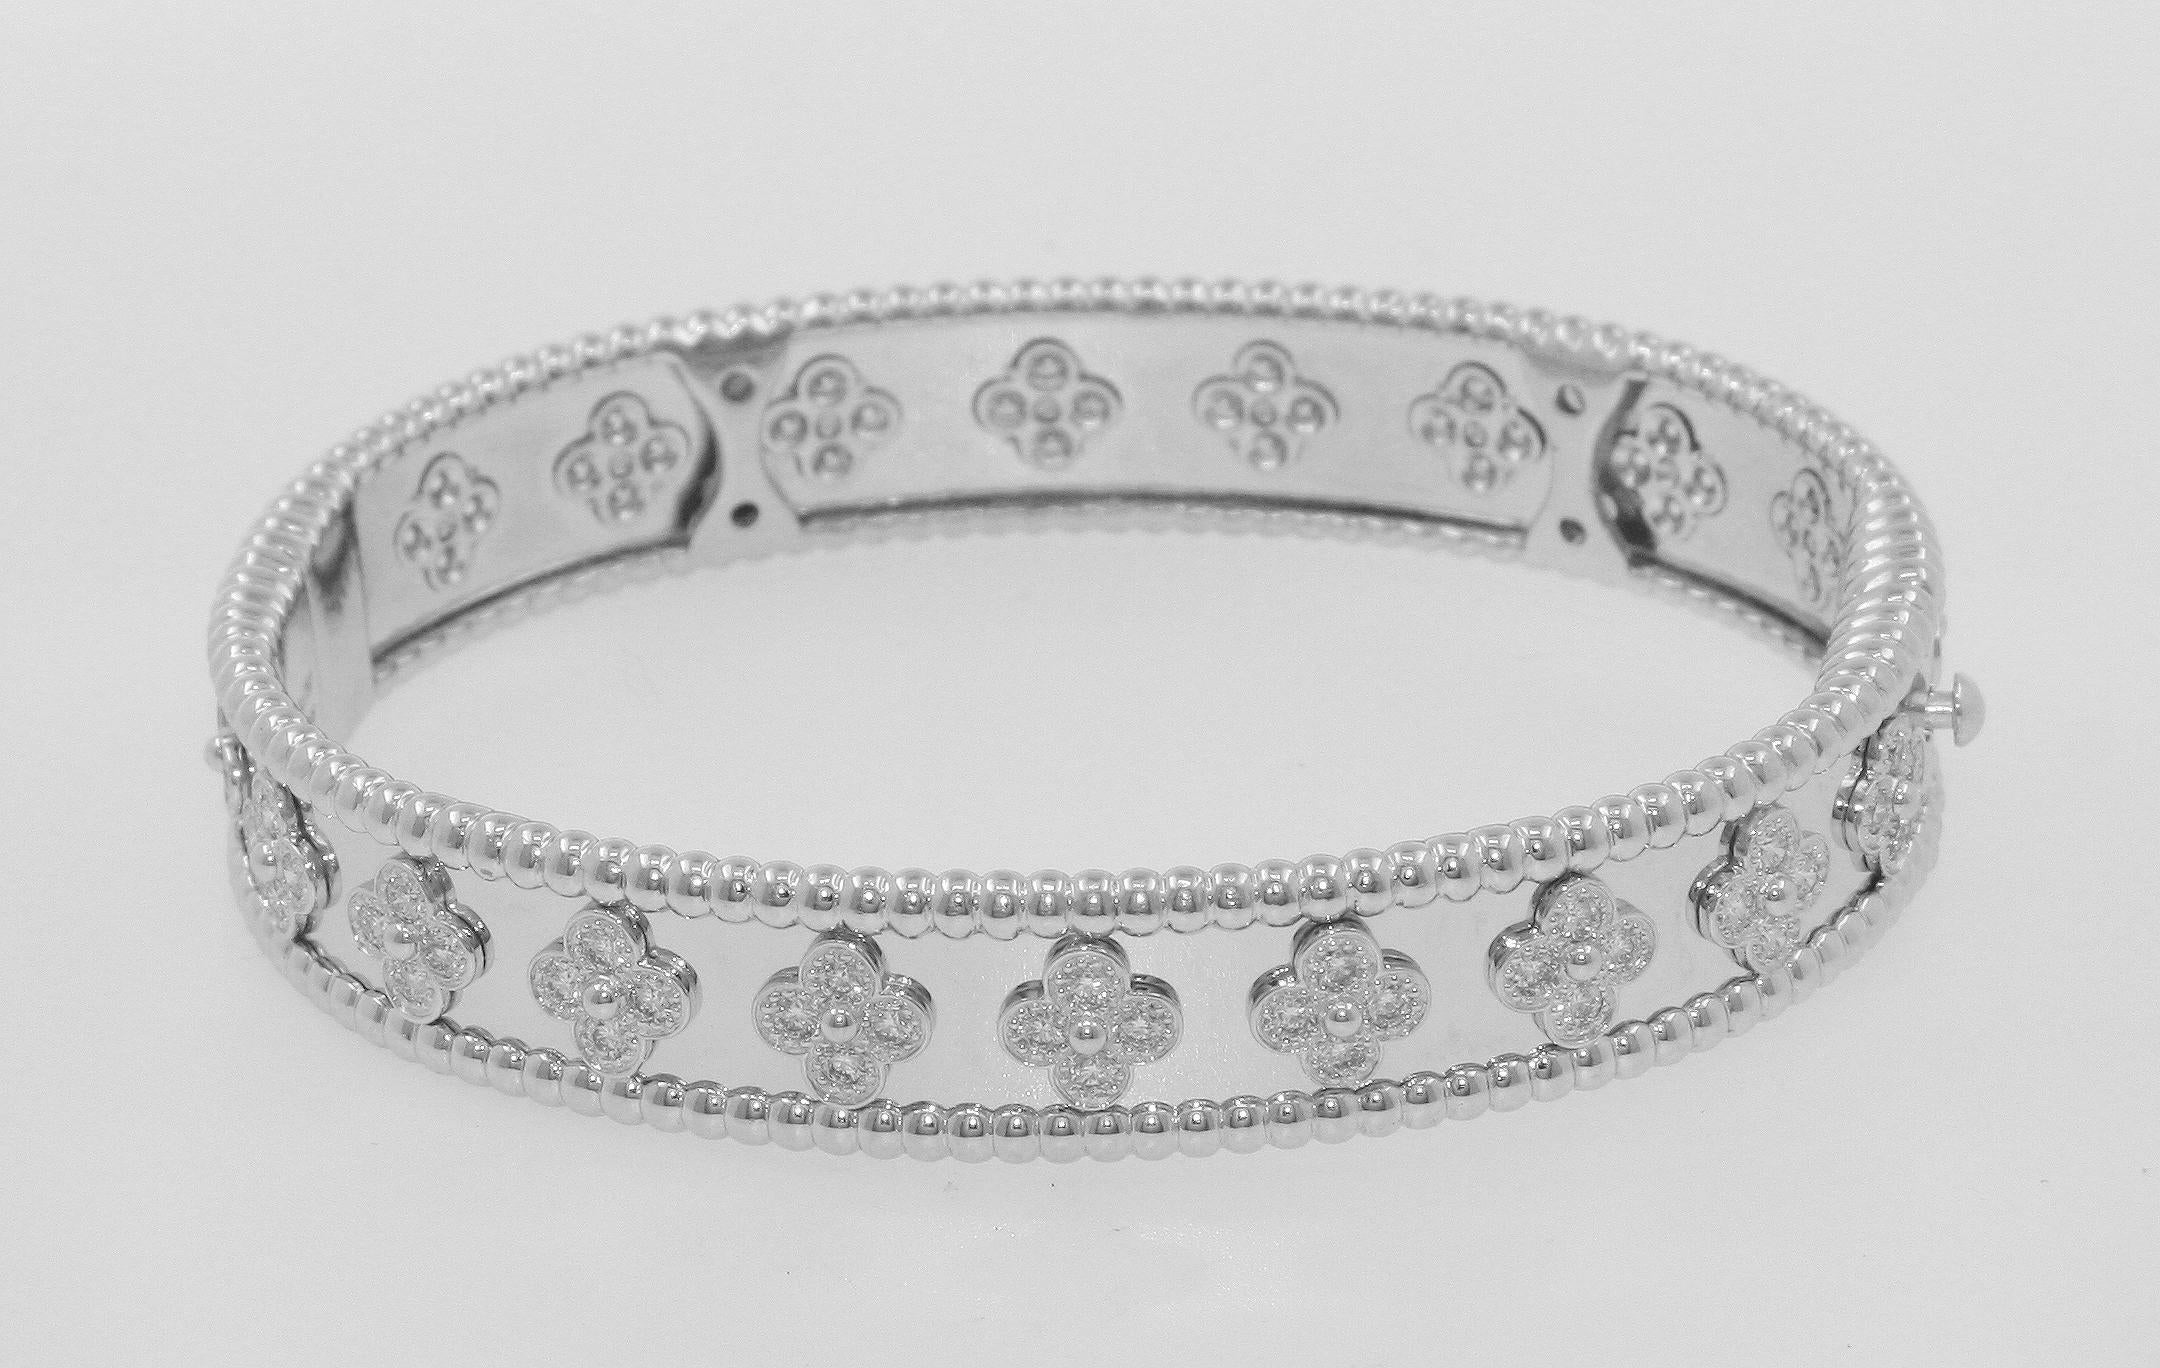 Perlee clovers bracelet from Van Cleef & Arpels, made in 18K white gold, set with round diamonds, medium model; diamond quality DEF, IF to VVS.
Come with Box and certificate.
Weight: 38.9g (Approx.) , Size: Medium
Reference : VCARN5B100
VCA265